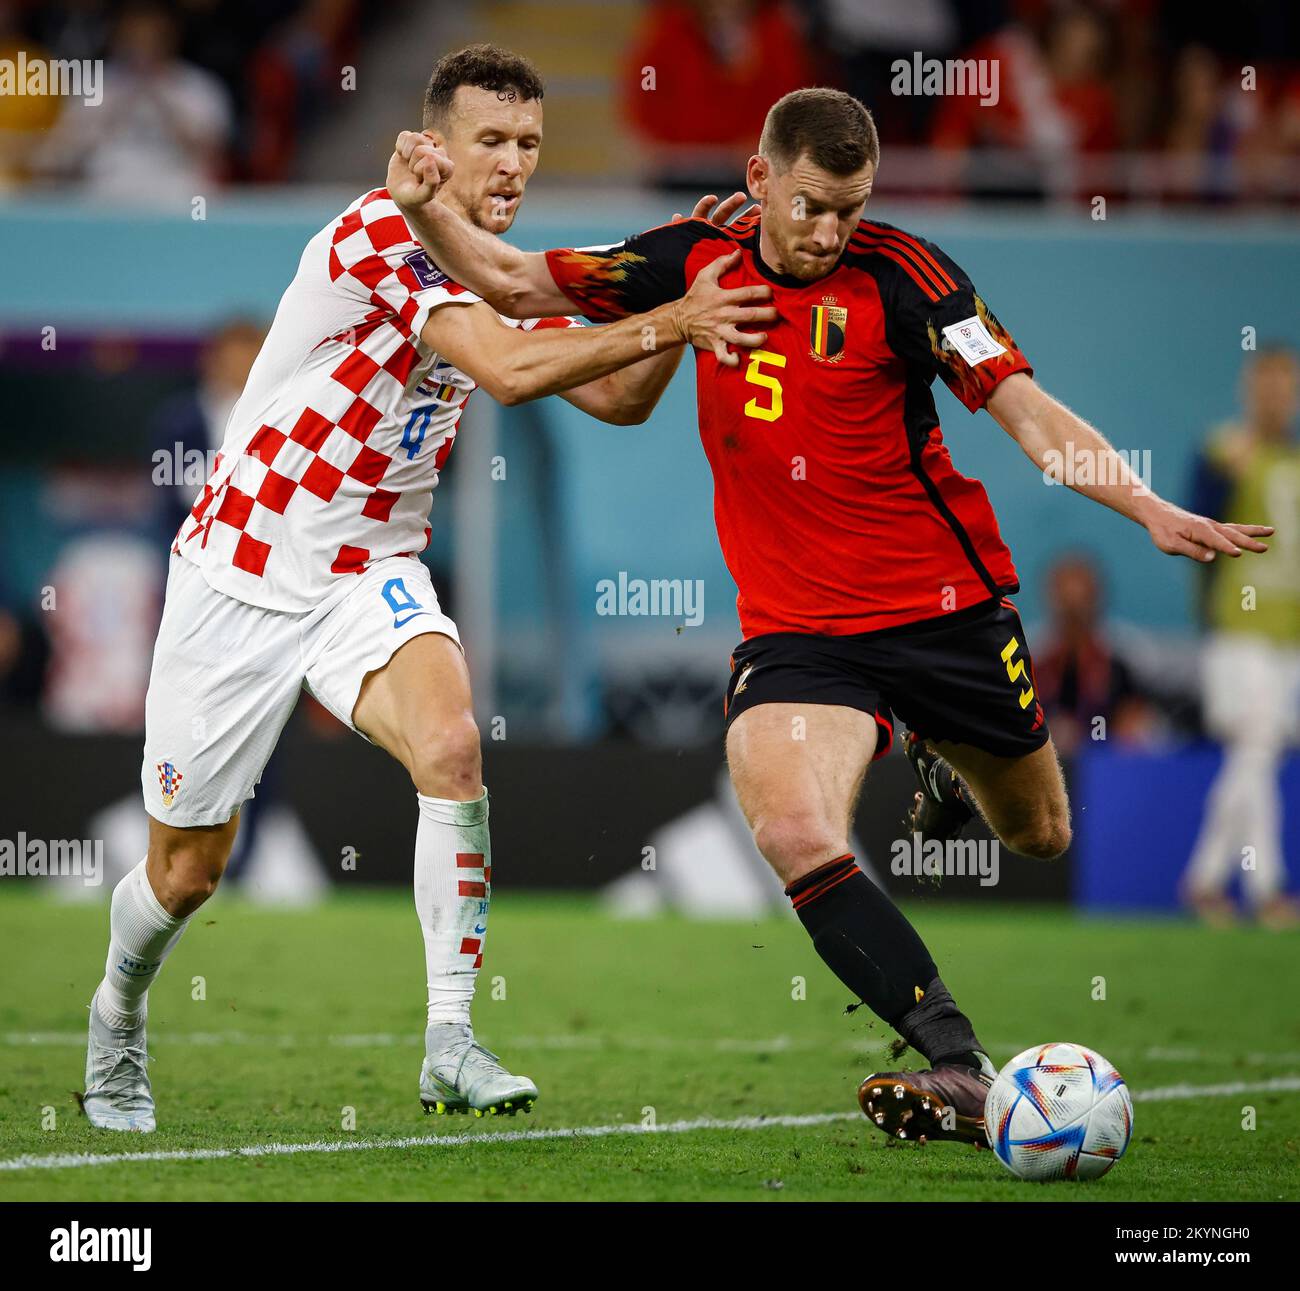 Doha, Catar. 01st Dec, 2022. PERISIC Ivan from Croatia VERTONGHEN Jan from Belgium during the match between Tunisia and France, valid for the group stage of the World Cup, held at the Education City Stadium in Doha, Qatar. Credit: Rodolfo Buhrer/La Imagem/FotoArena/Alamy Live News Stock Photo